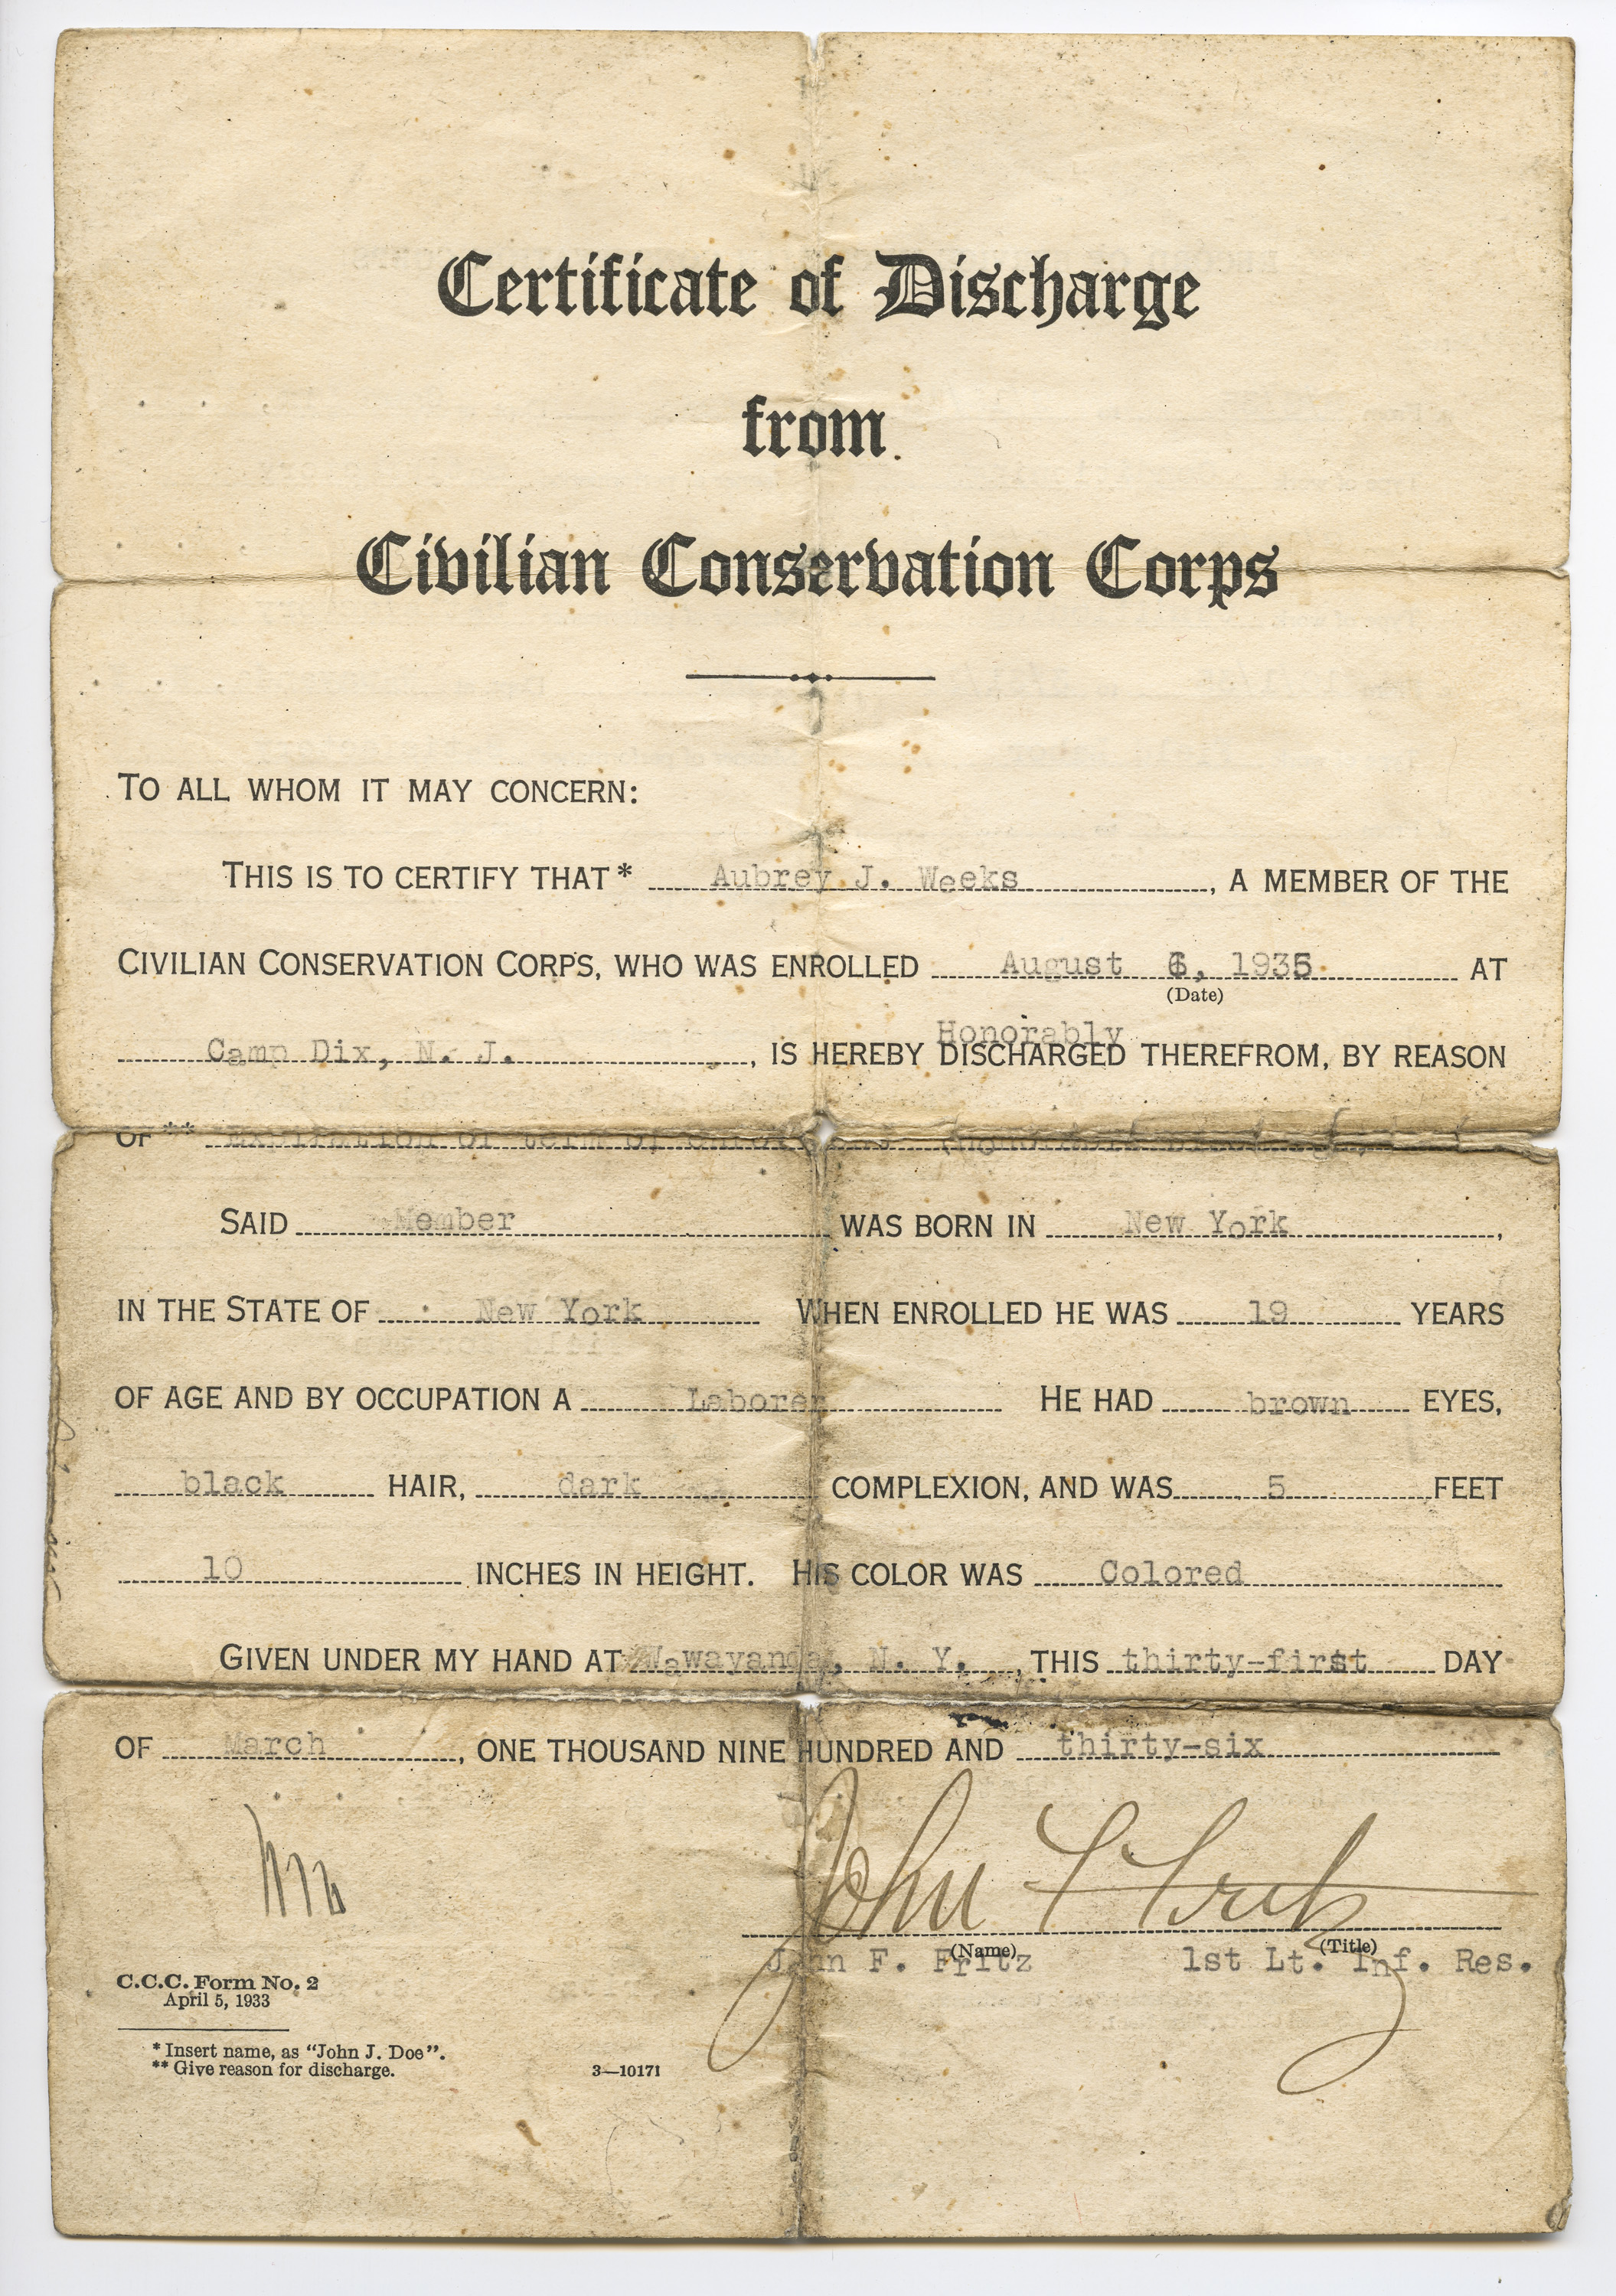 Certificate of Discharge, Civilian Conservation Corps, 1936.